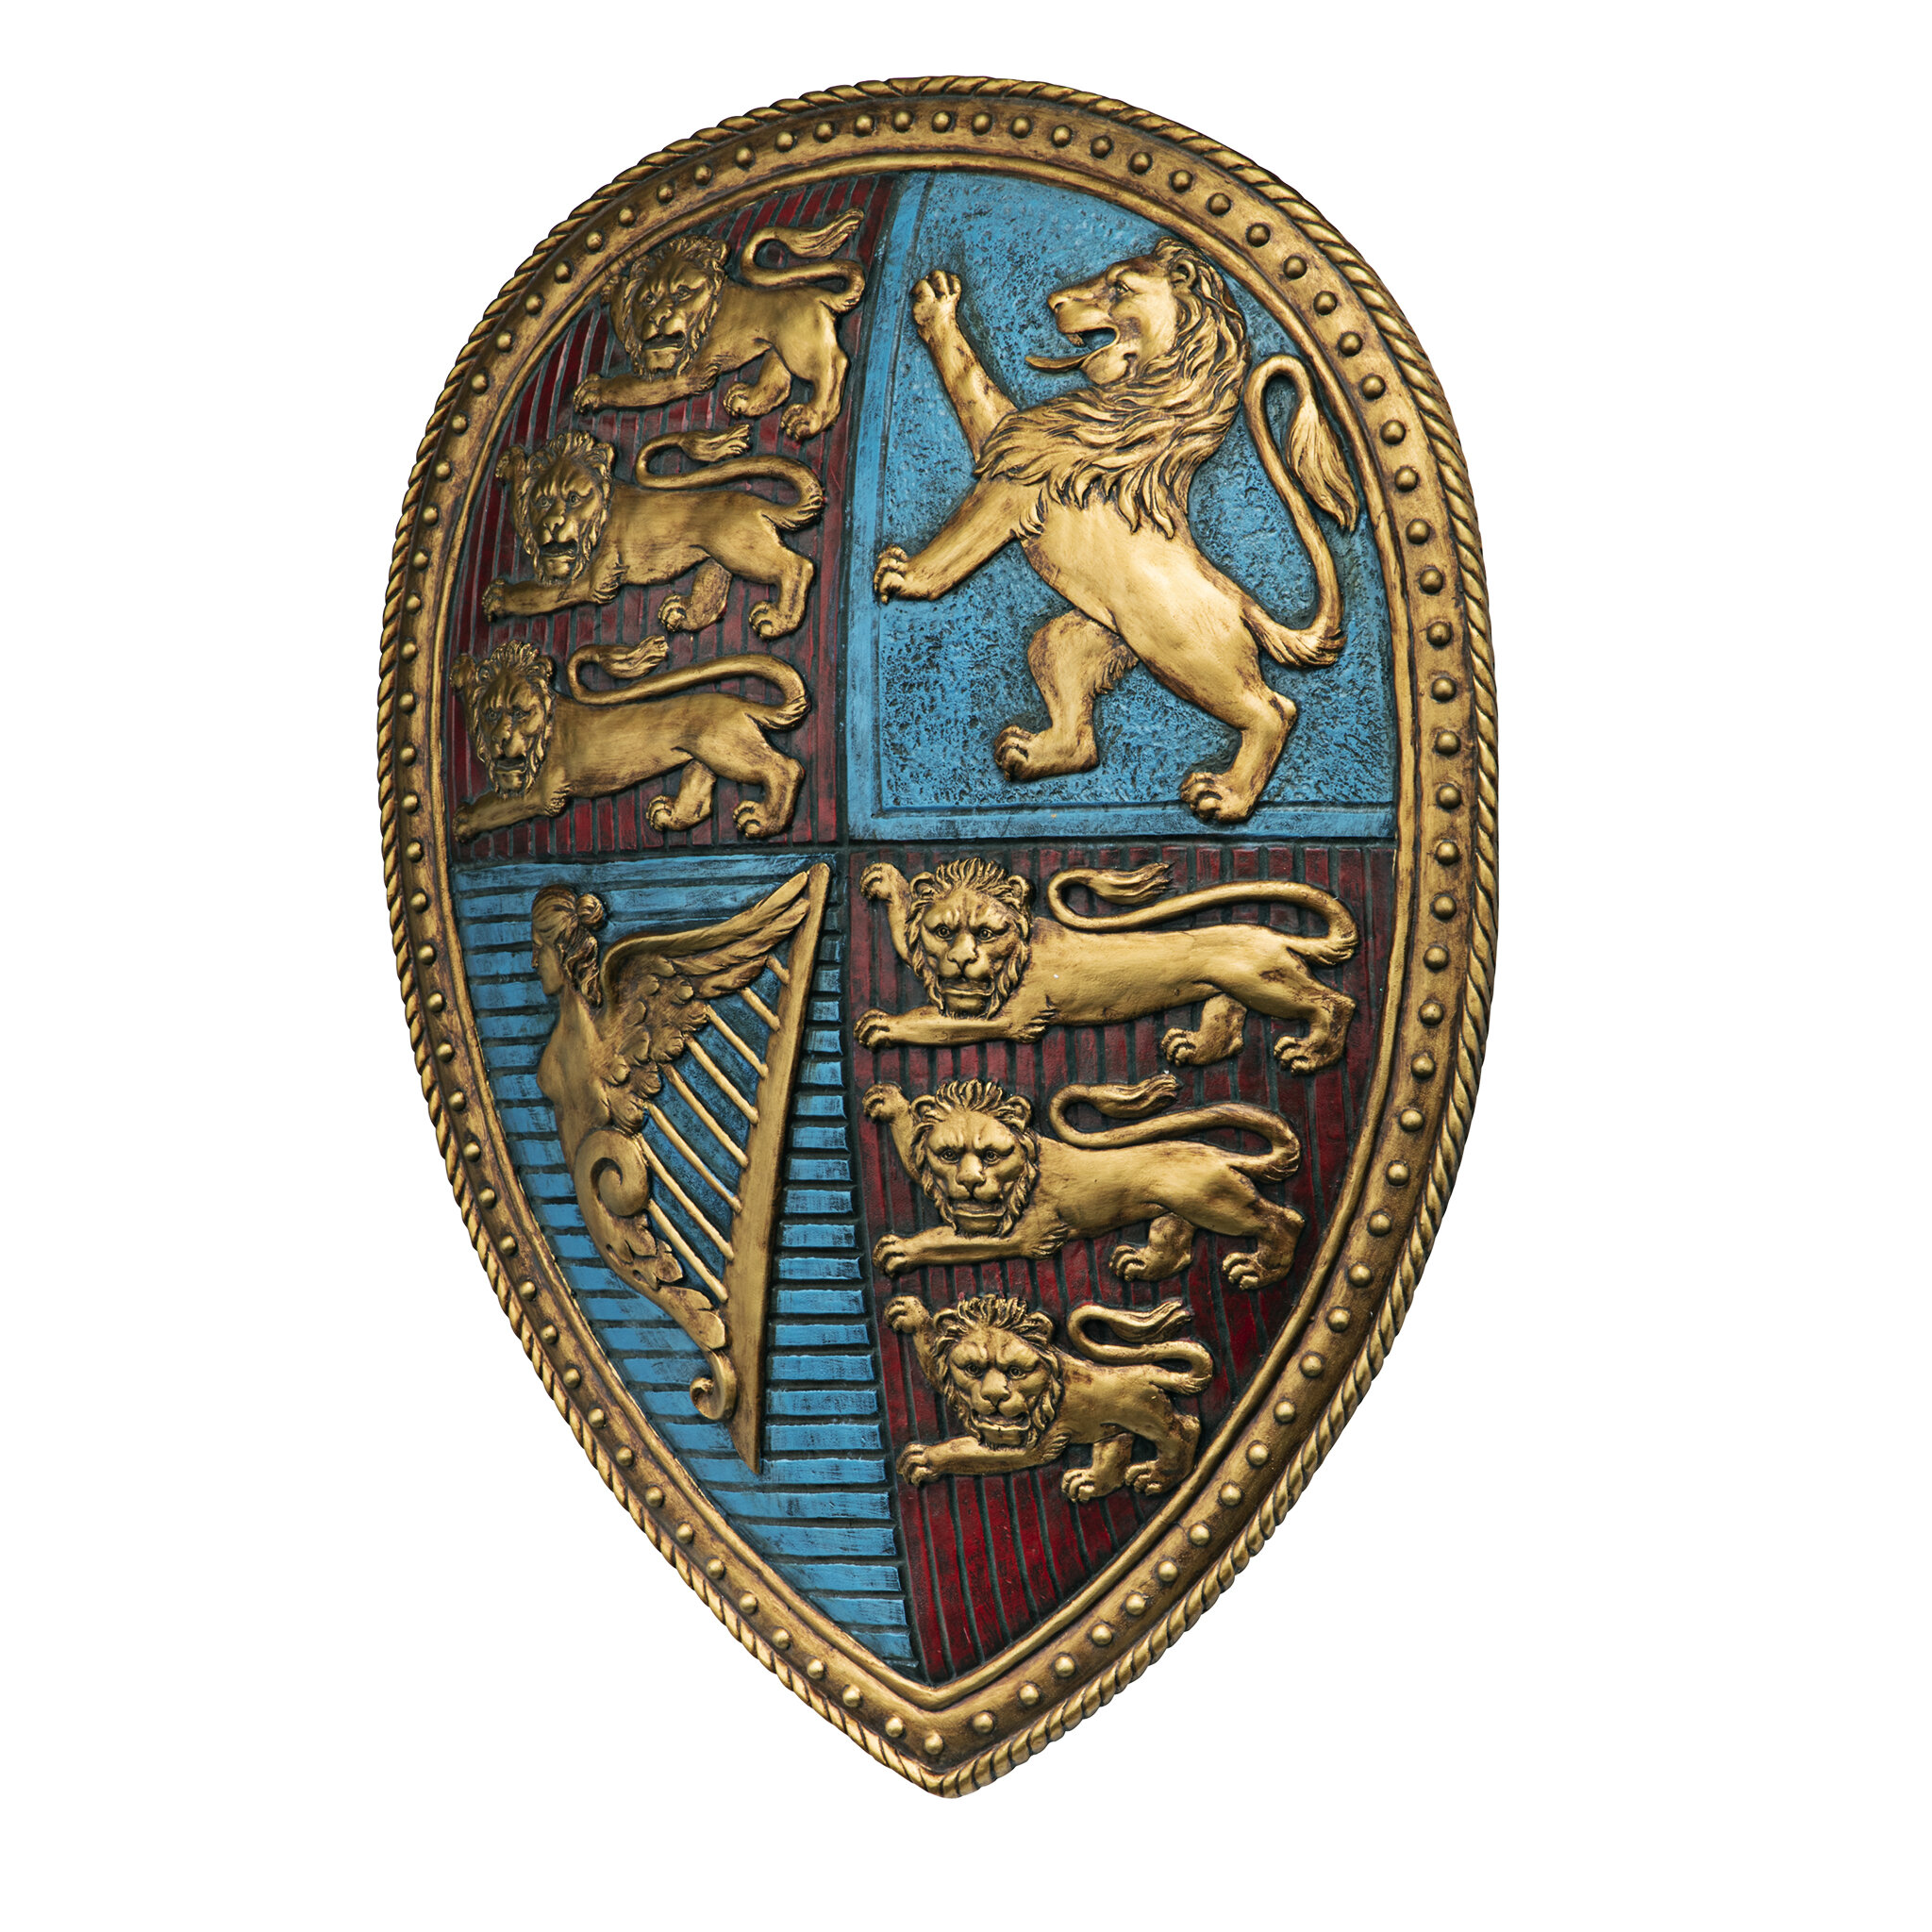 coat of arms shield